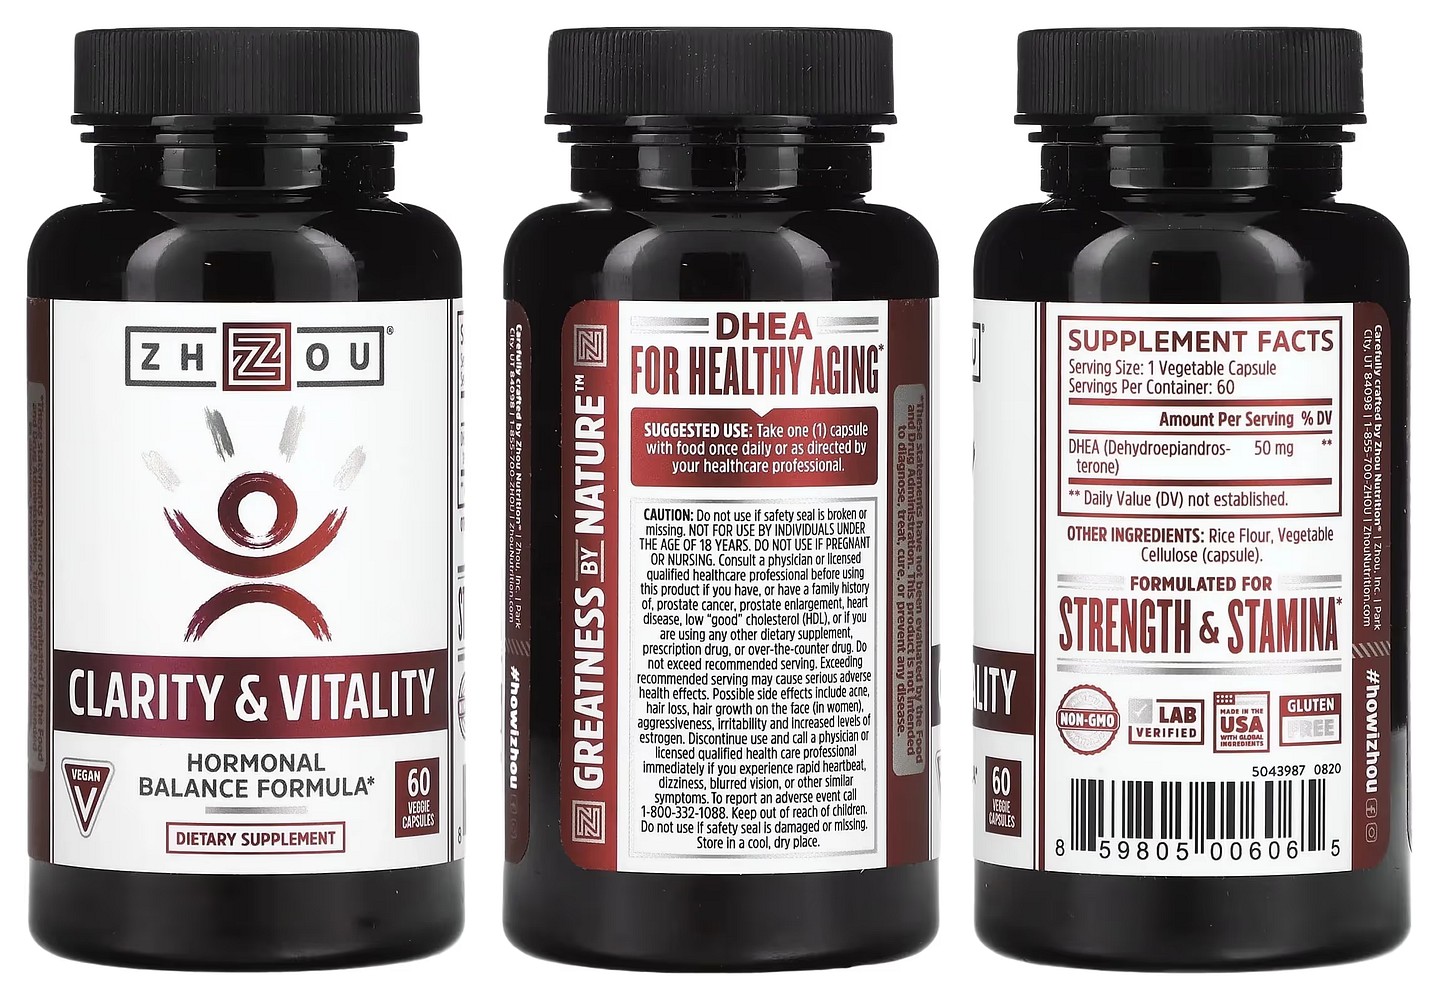 Zhou Nutrition, Clarity & Vitality packaging